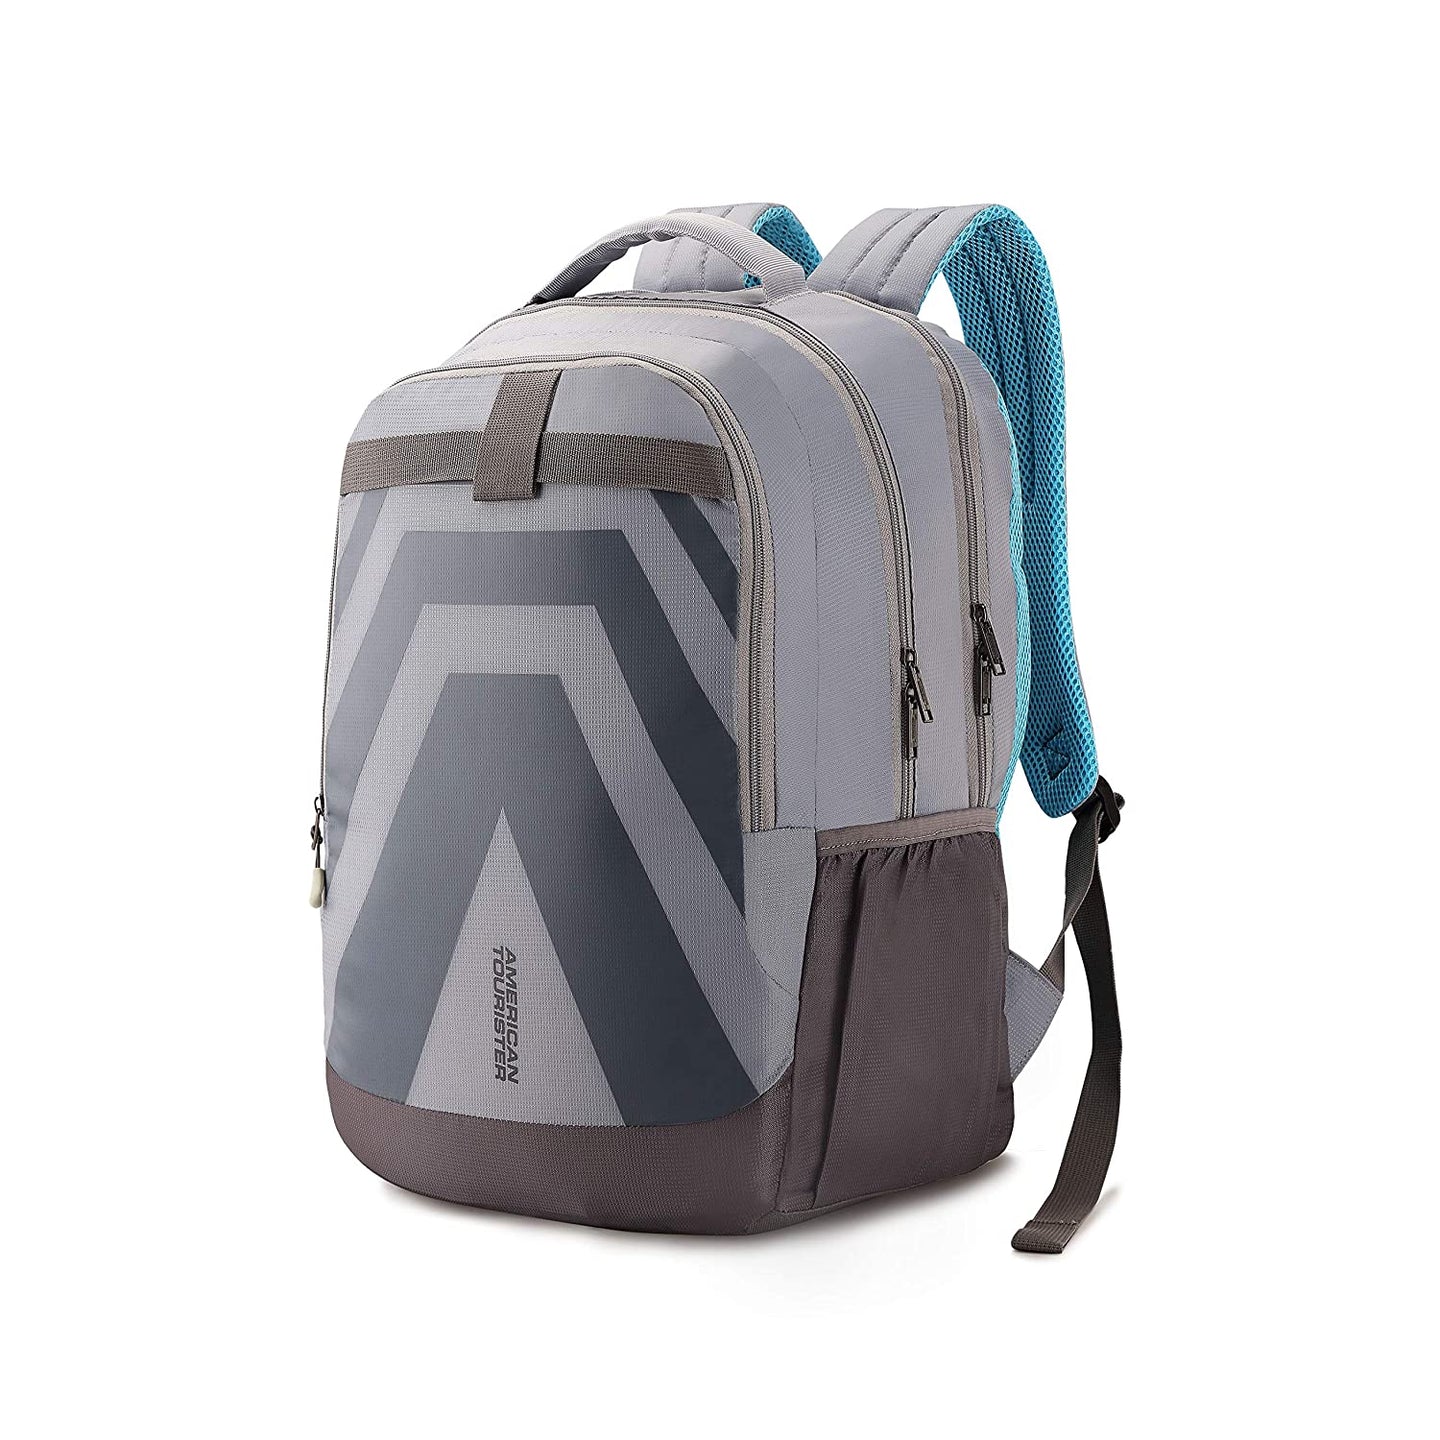 American Tourister Jet 30 Ltrs Light Grey Casual Backpack (FE0 (0) 38 004)